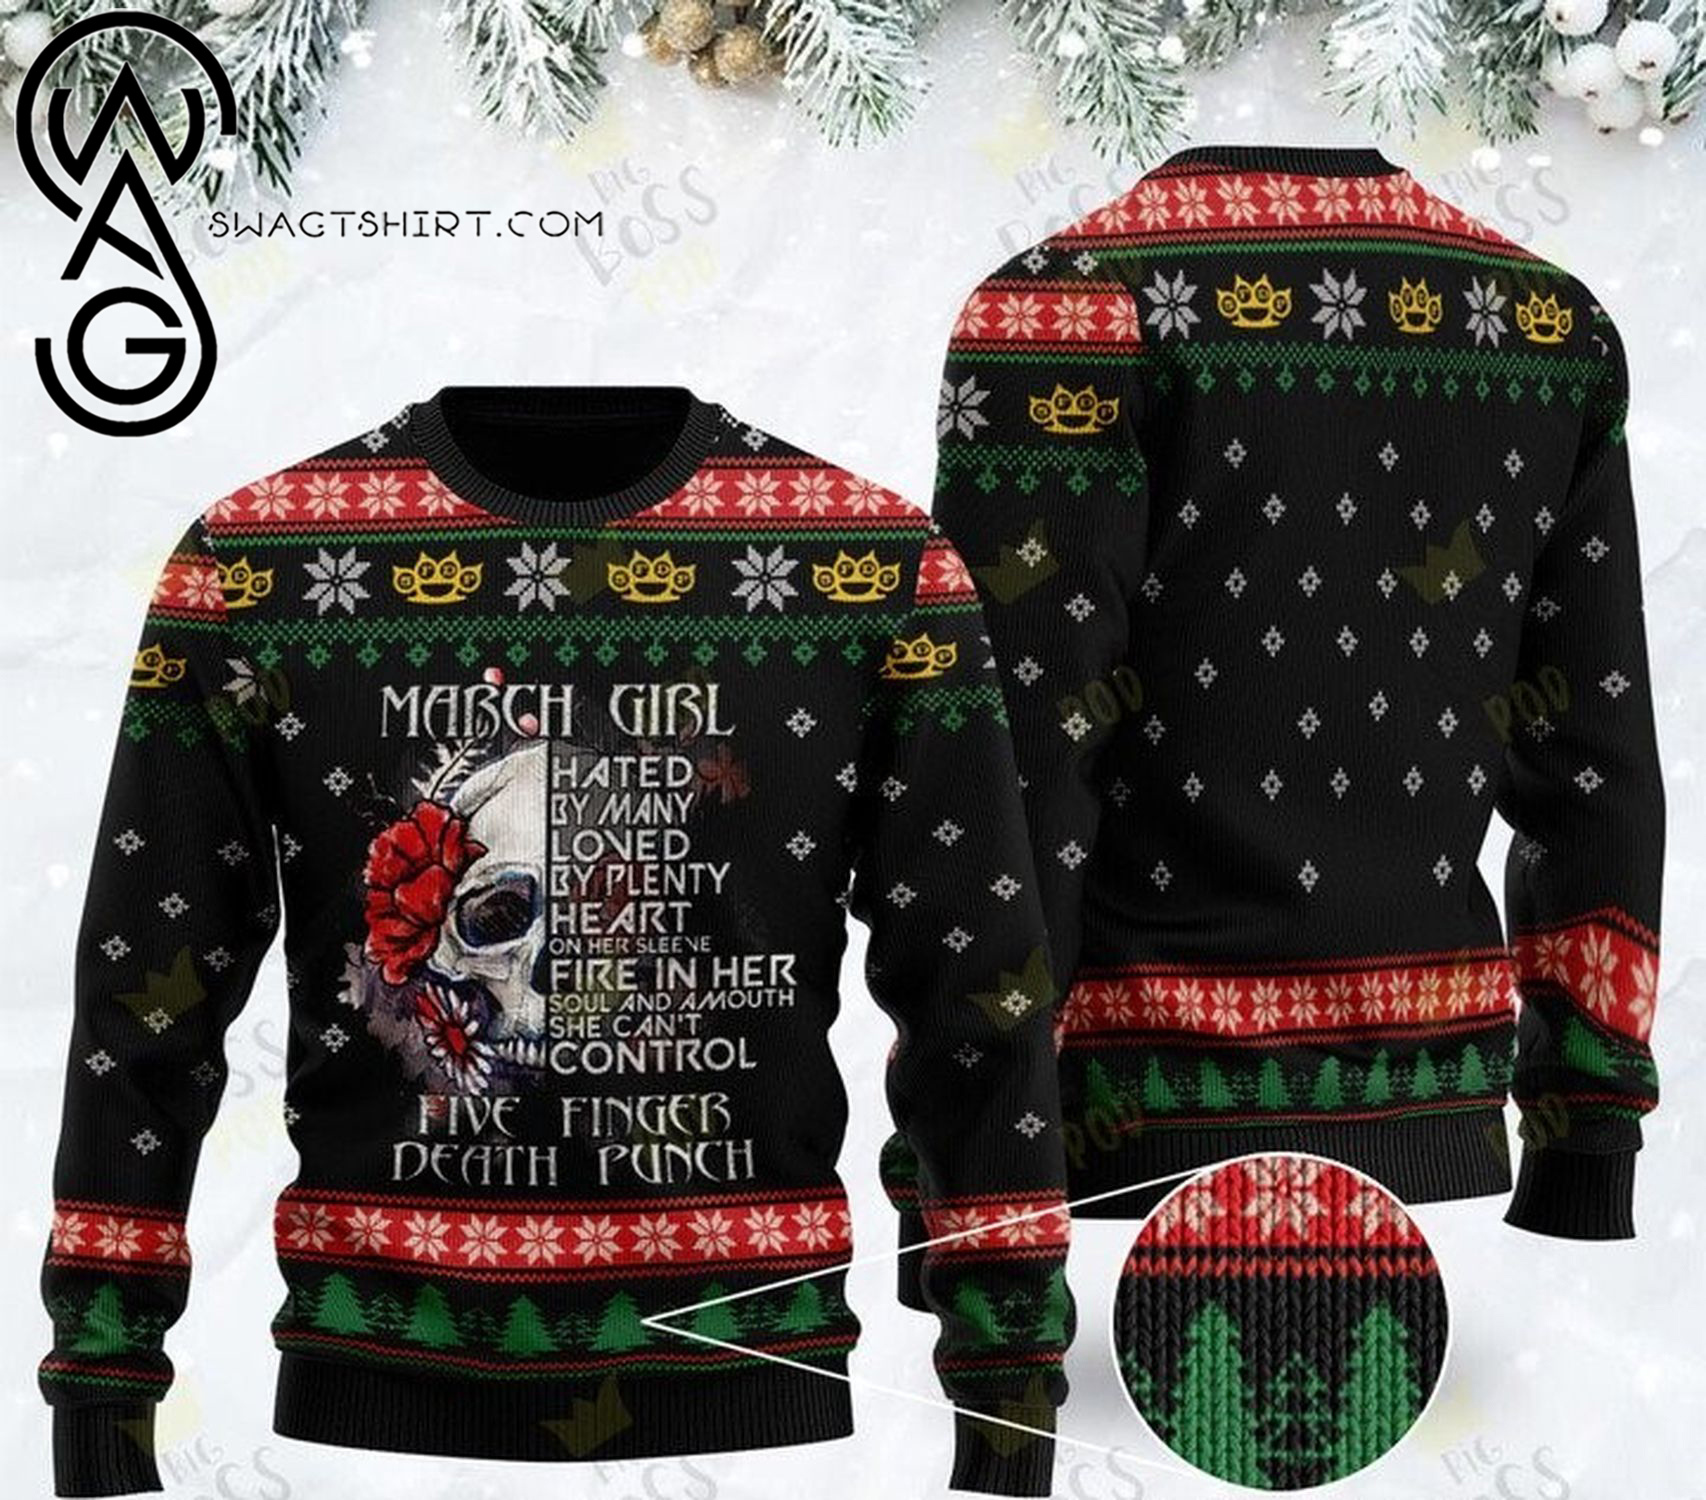 March girl five finger death punch ugly christmas sweater